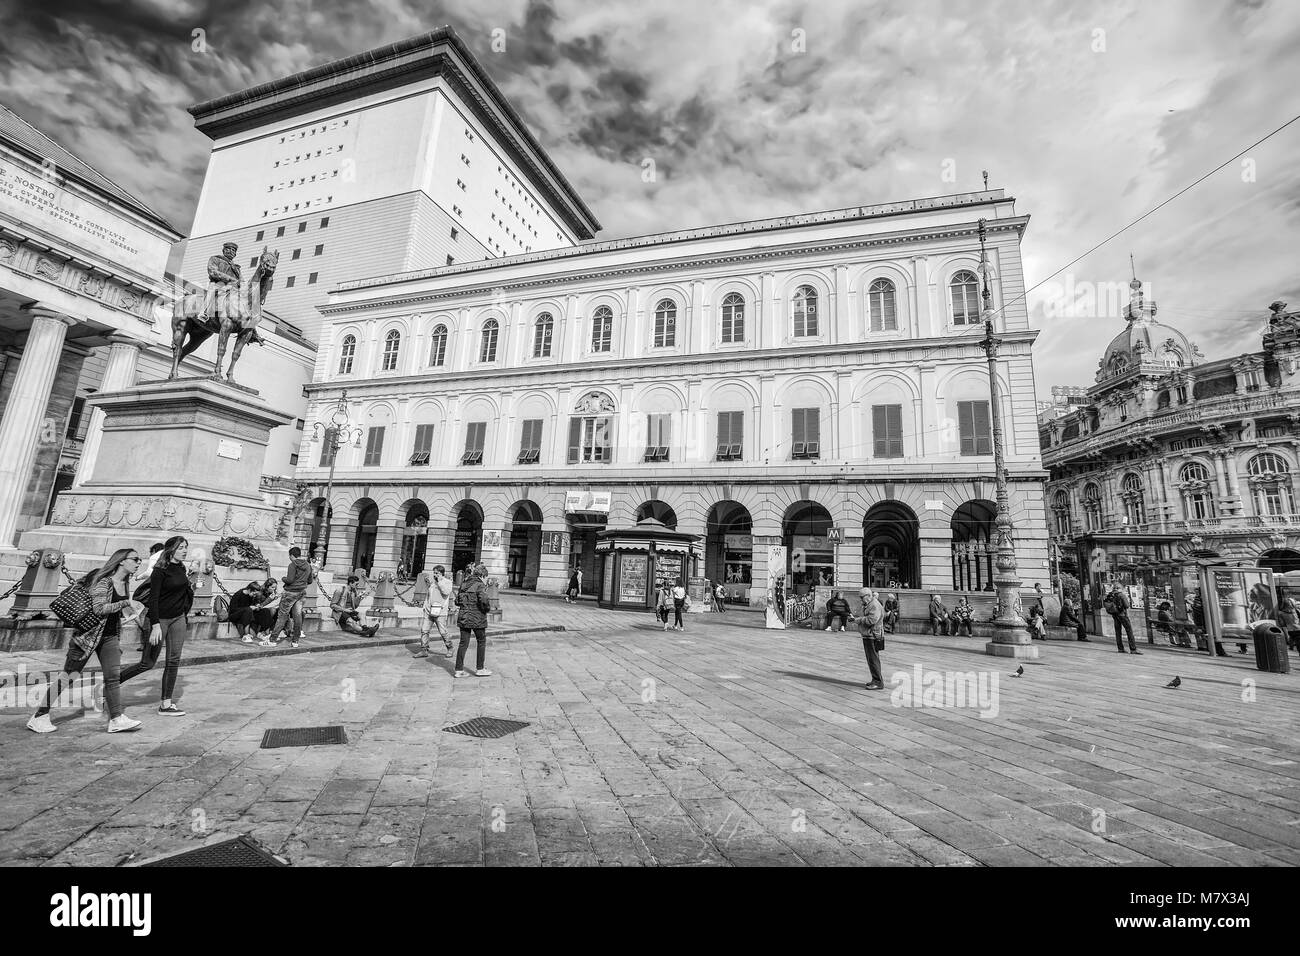 Teatro Carlo Felice High Resolution Stock Photography and Images - Alamy